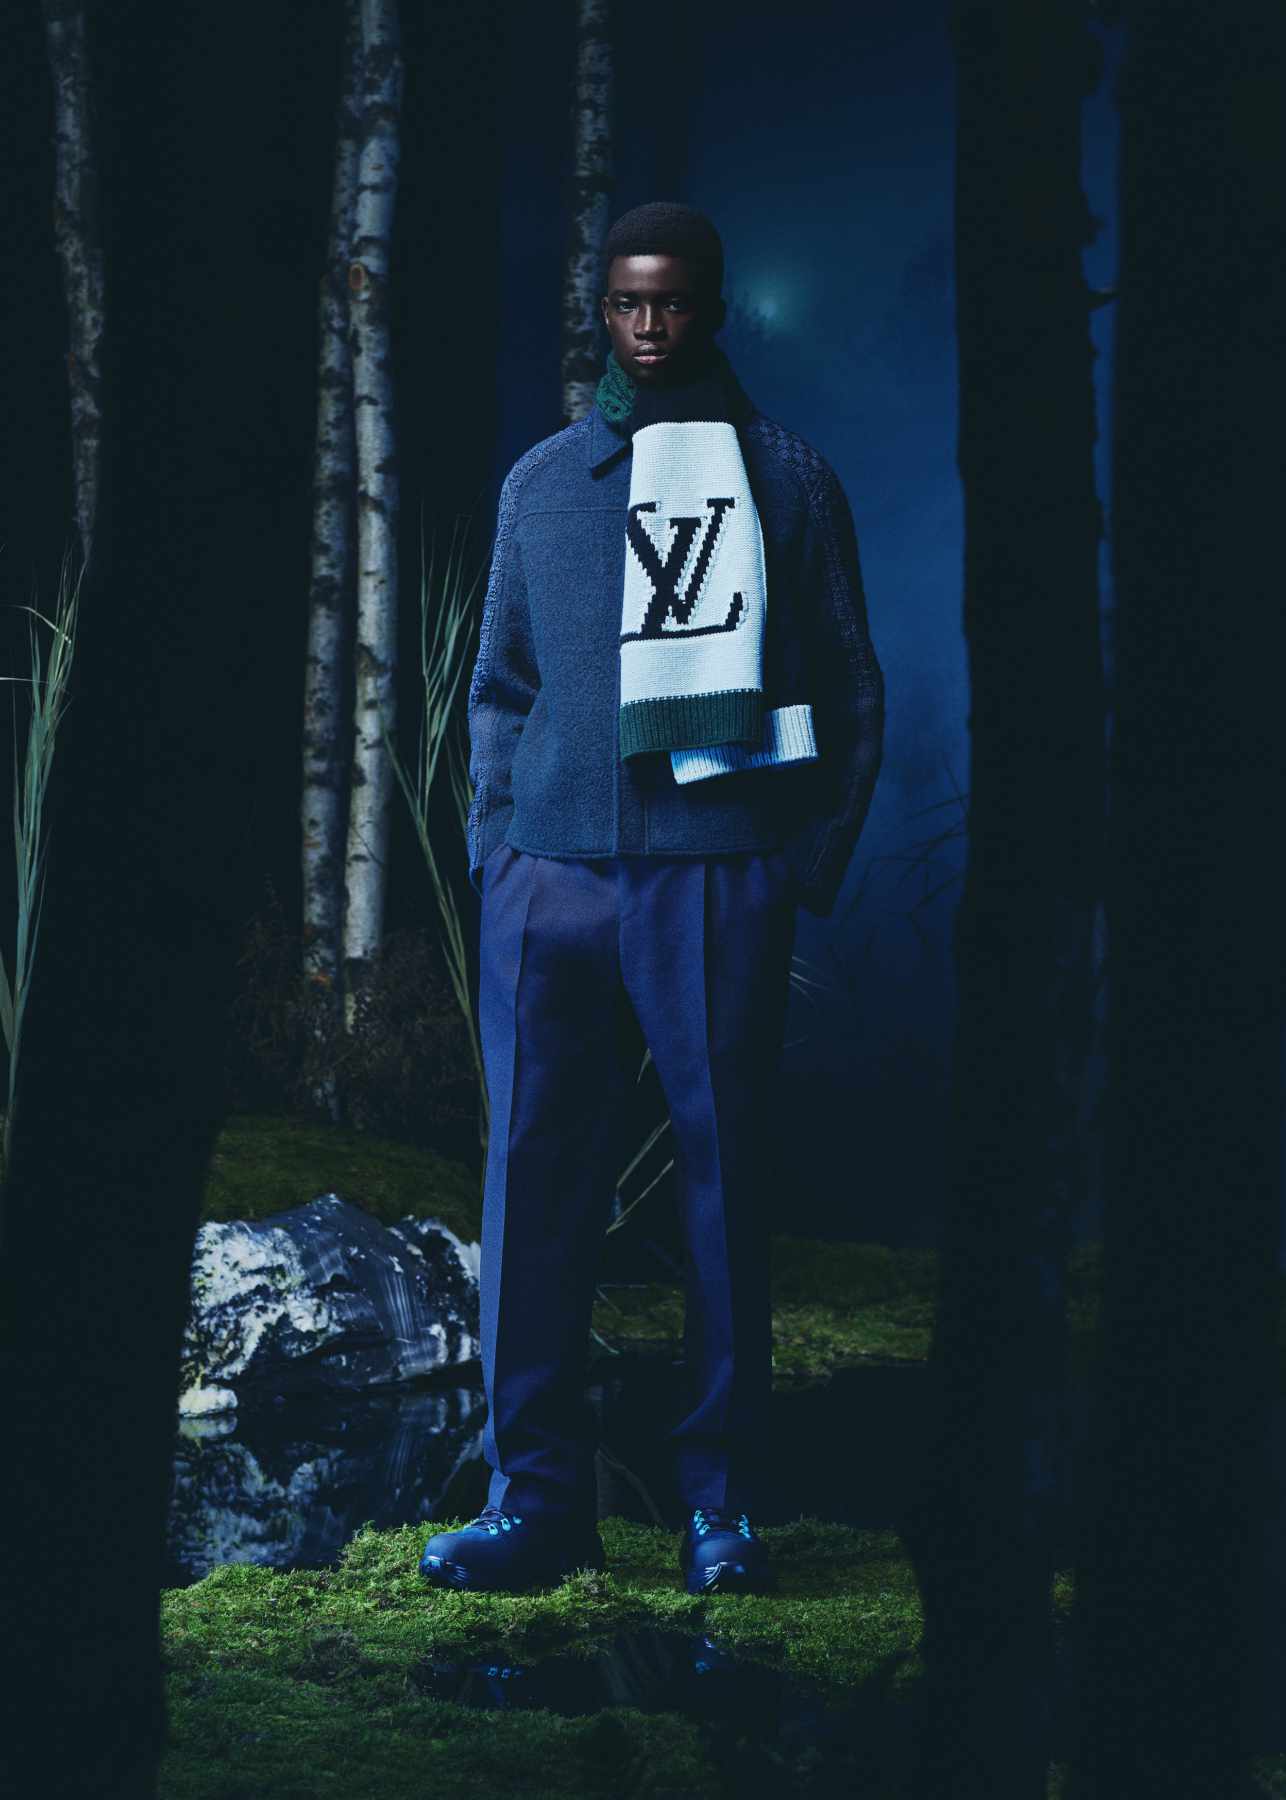 Louis Vuitton Wants You to “Fall In Love” With the Men's Pre